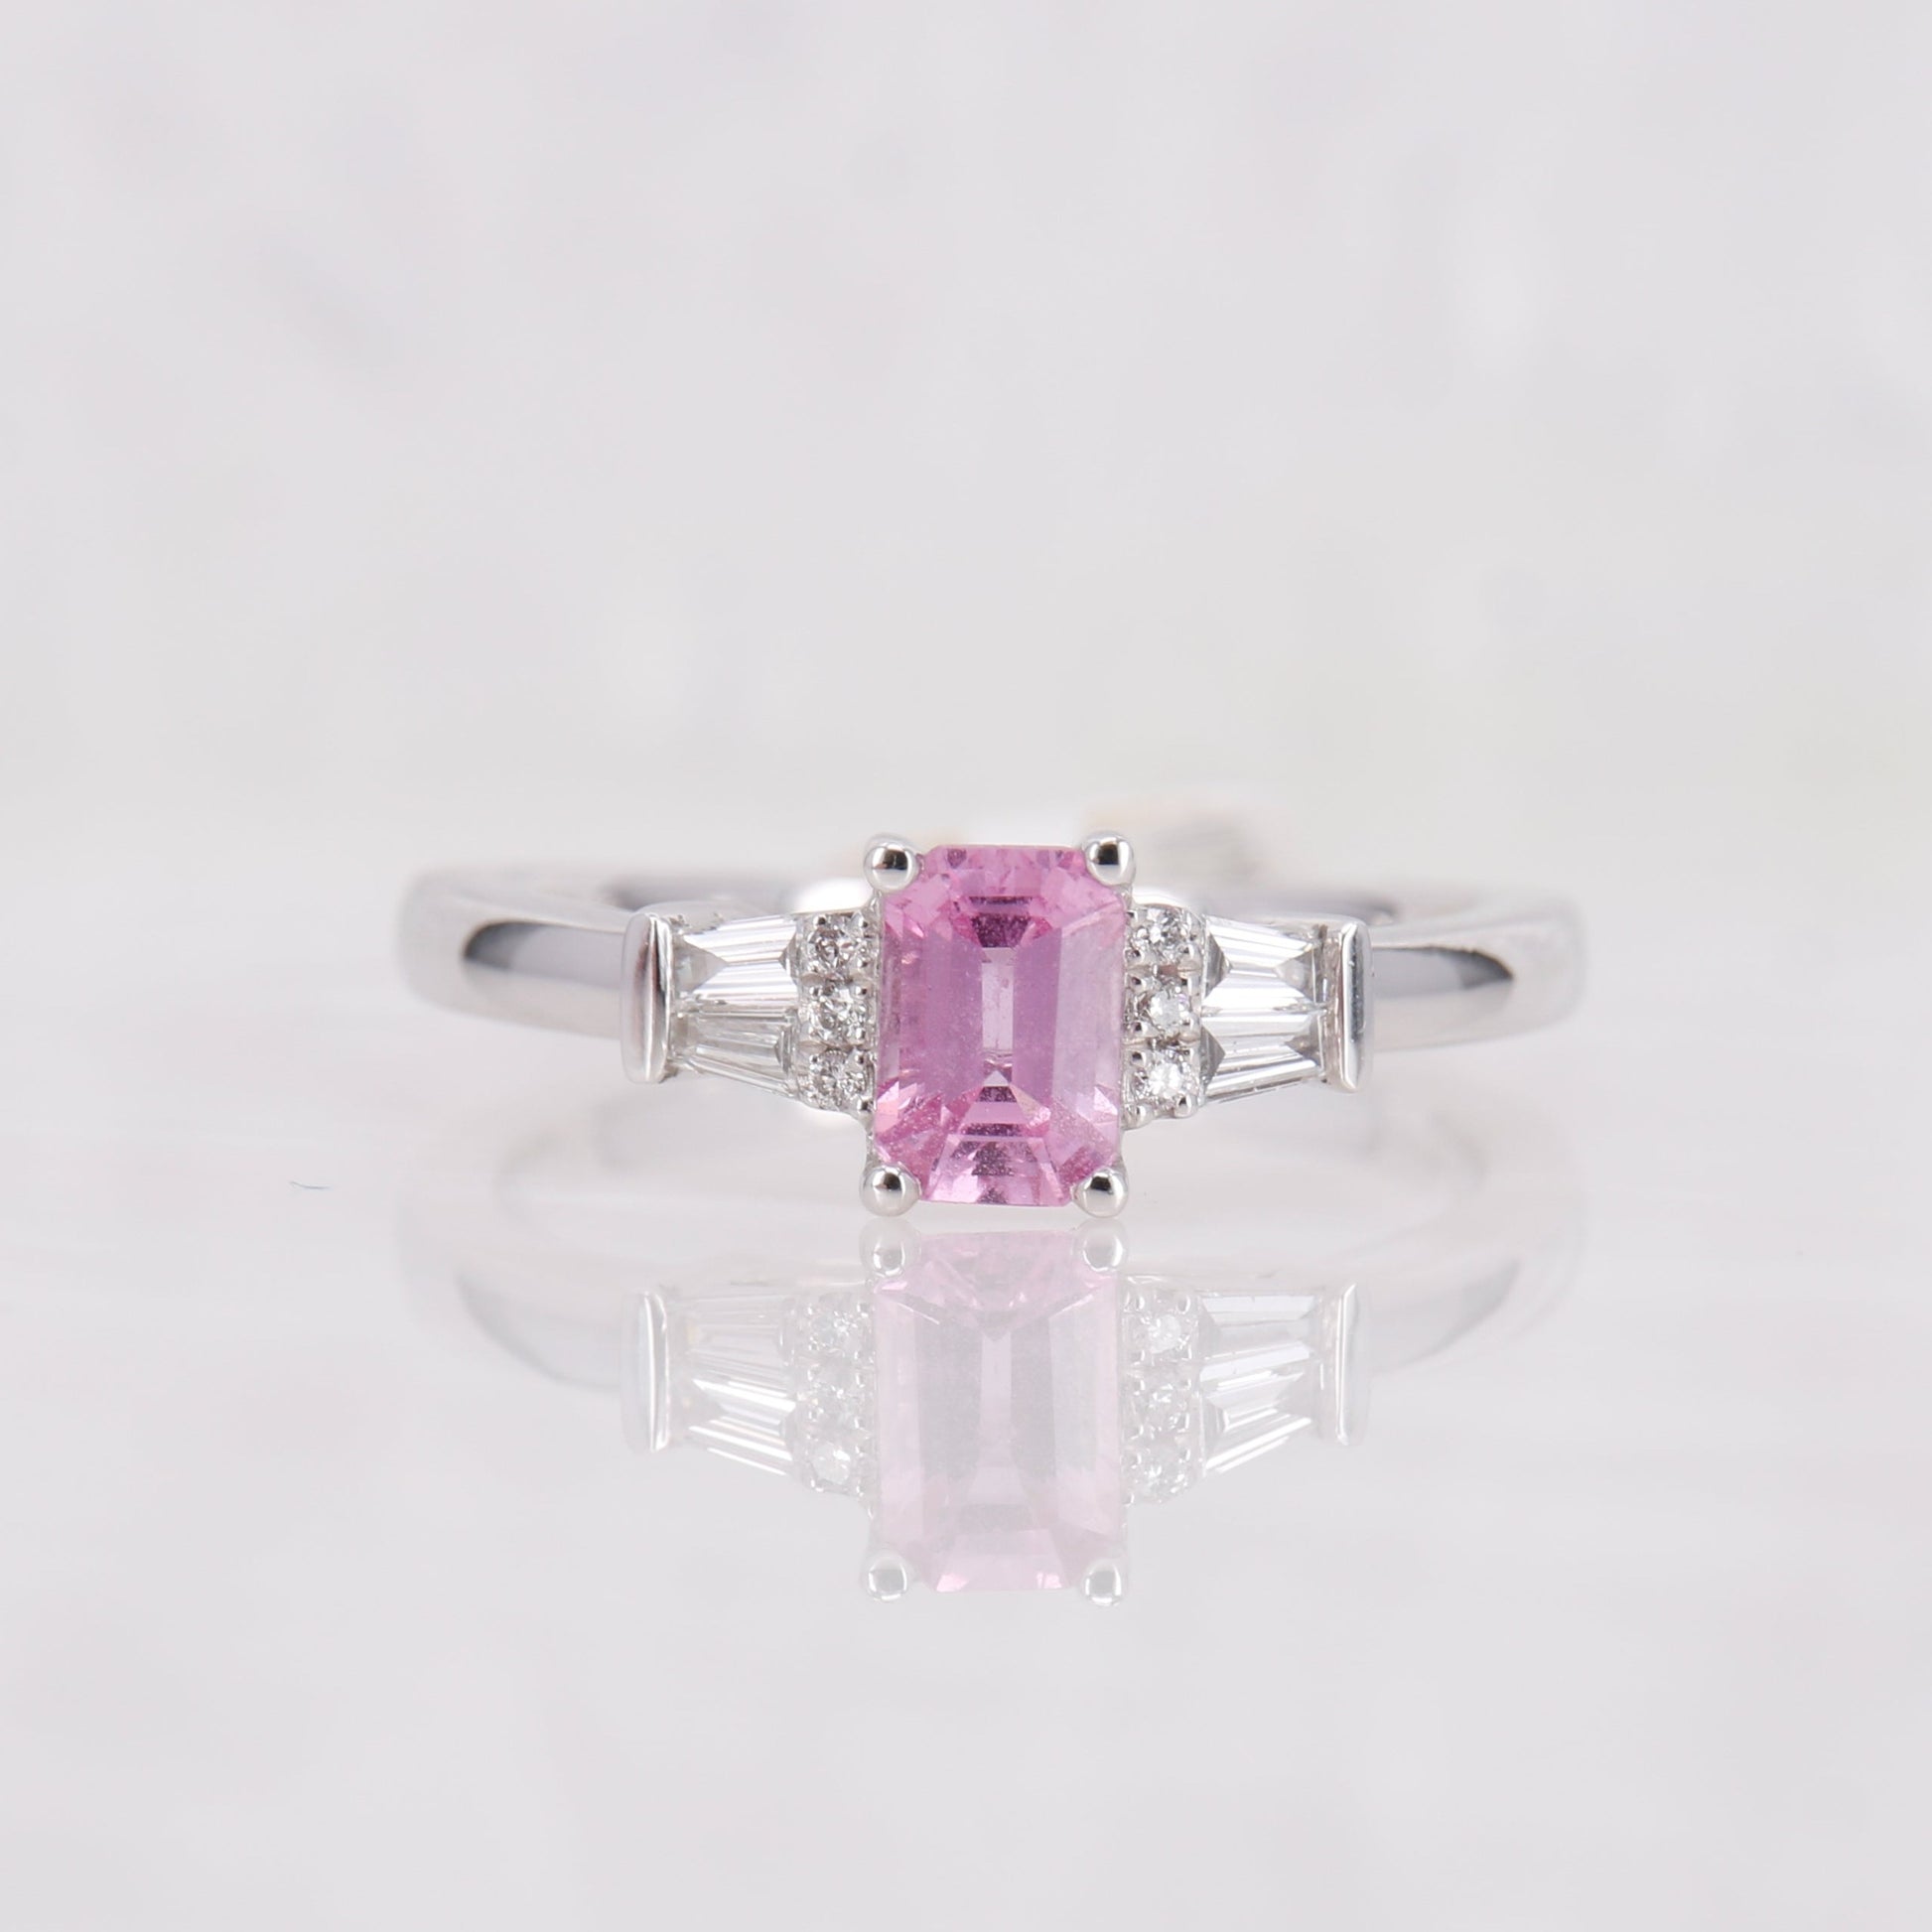 Pink Sapphire and Diamond Ring set in Platinum. Tapered baguette side stones. 